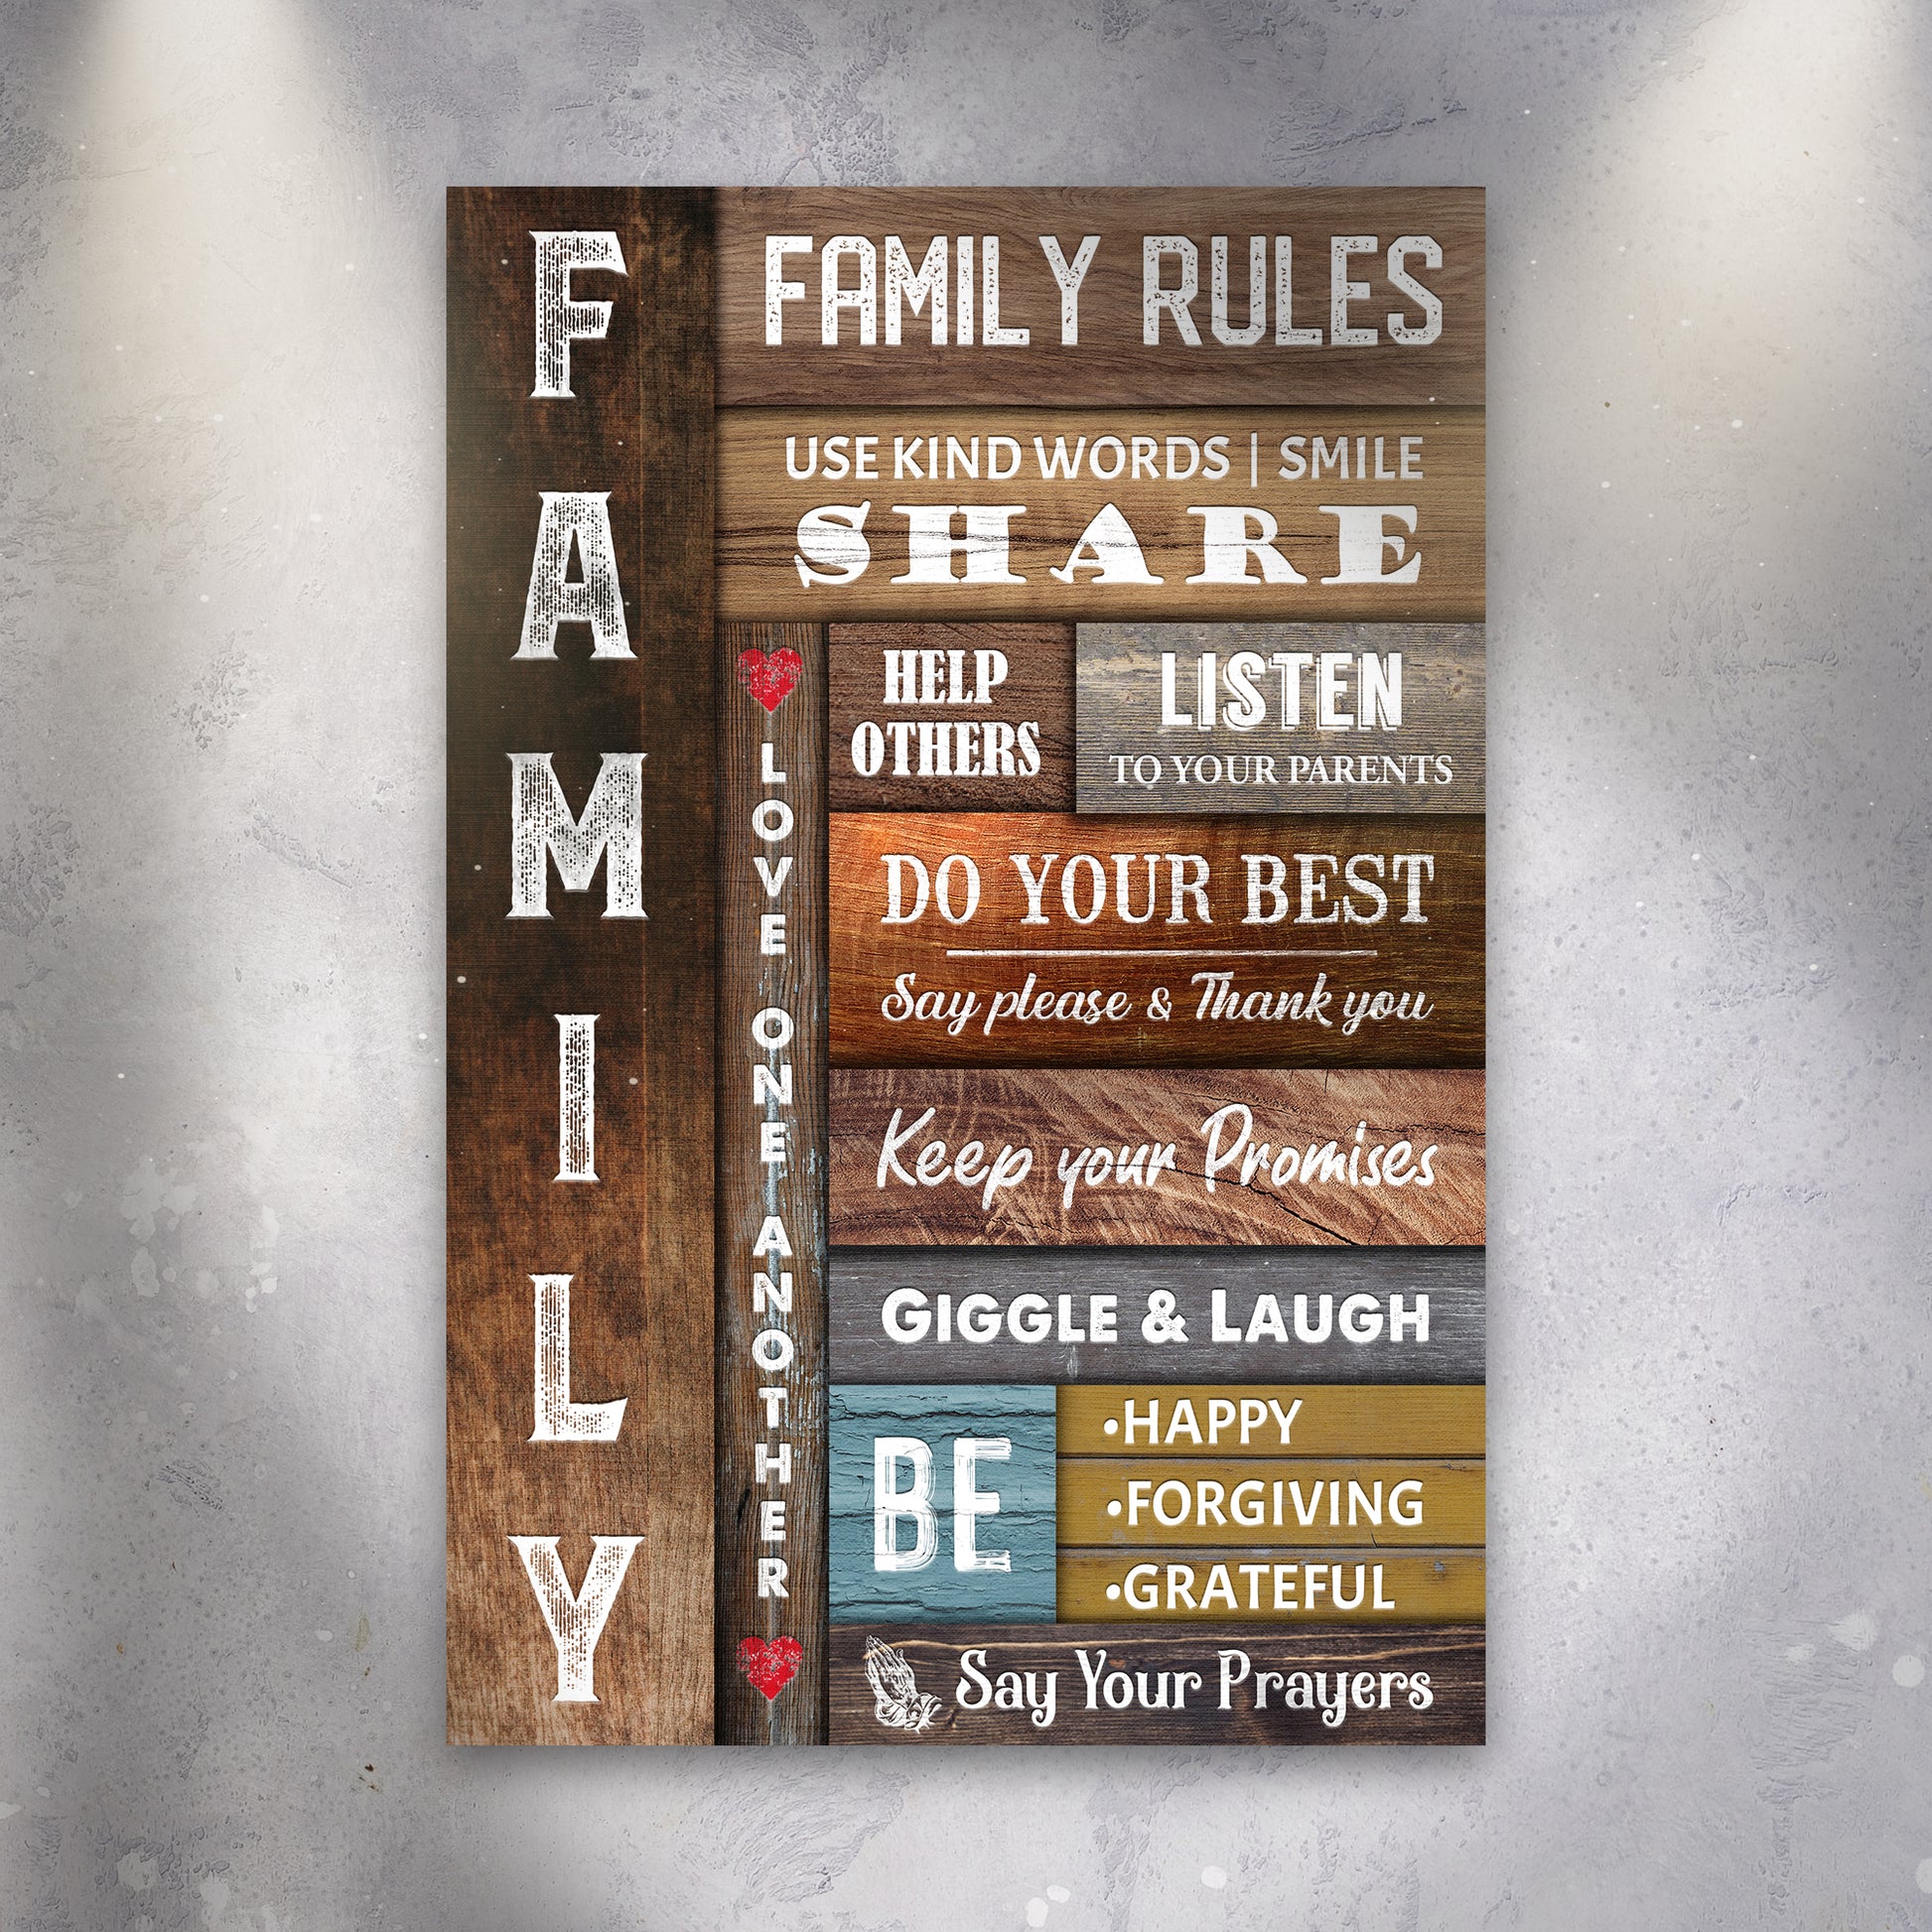 Use Kind Words, Listen to your parents Family Rules Sign (READY TO HANG) - Wall Art Image by Tailored Canvases